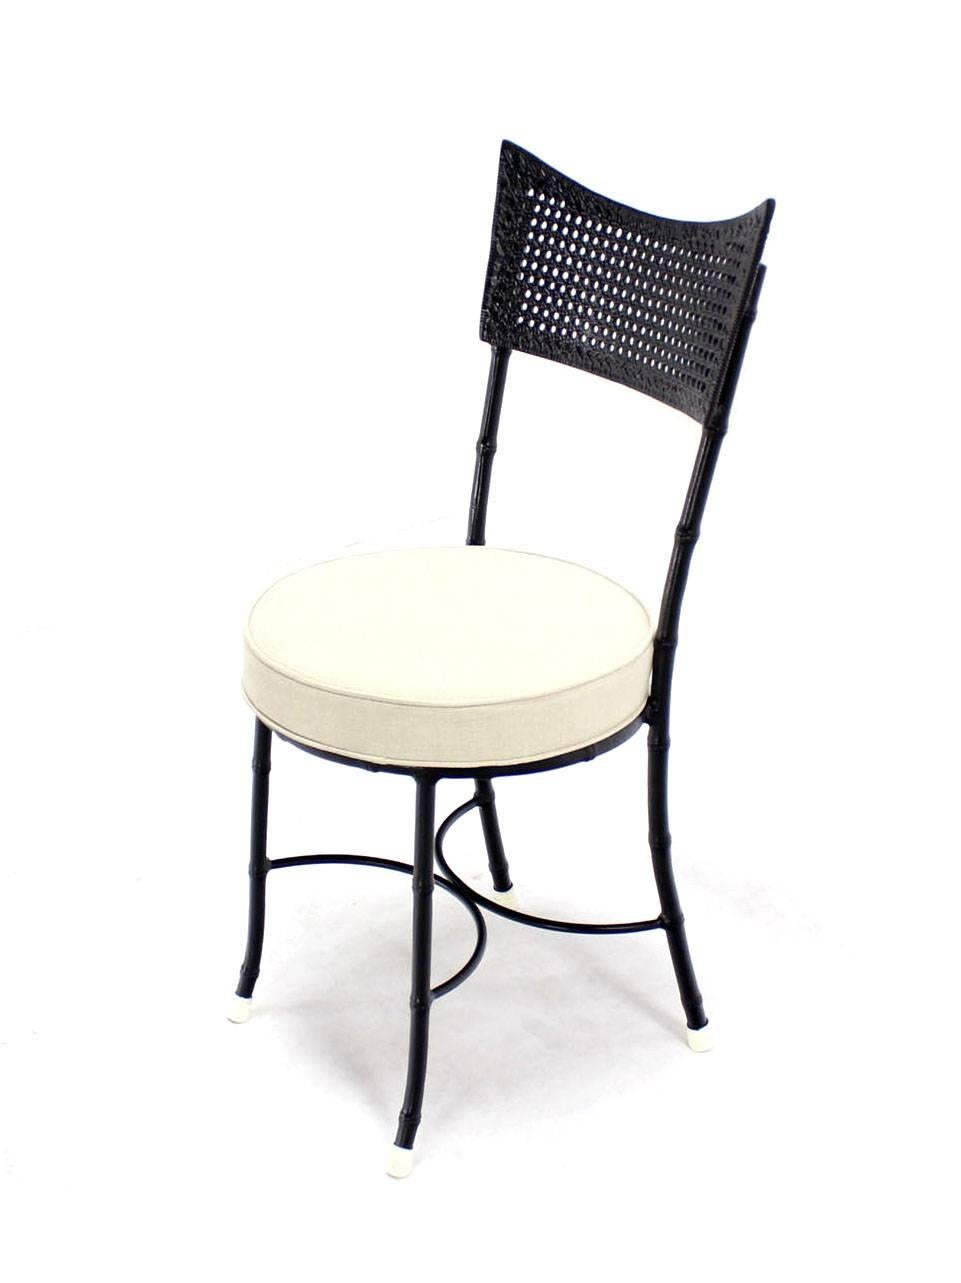 Four Cast Aluminum Faux Bamboo and Cane Round Seat Chairs 1